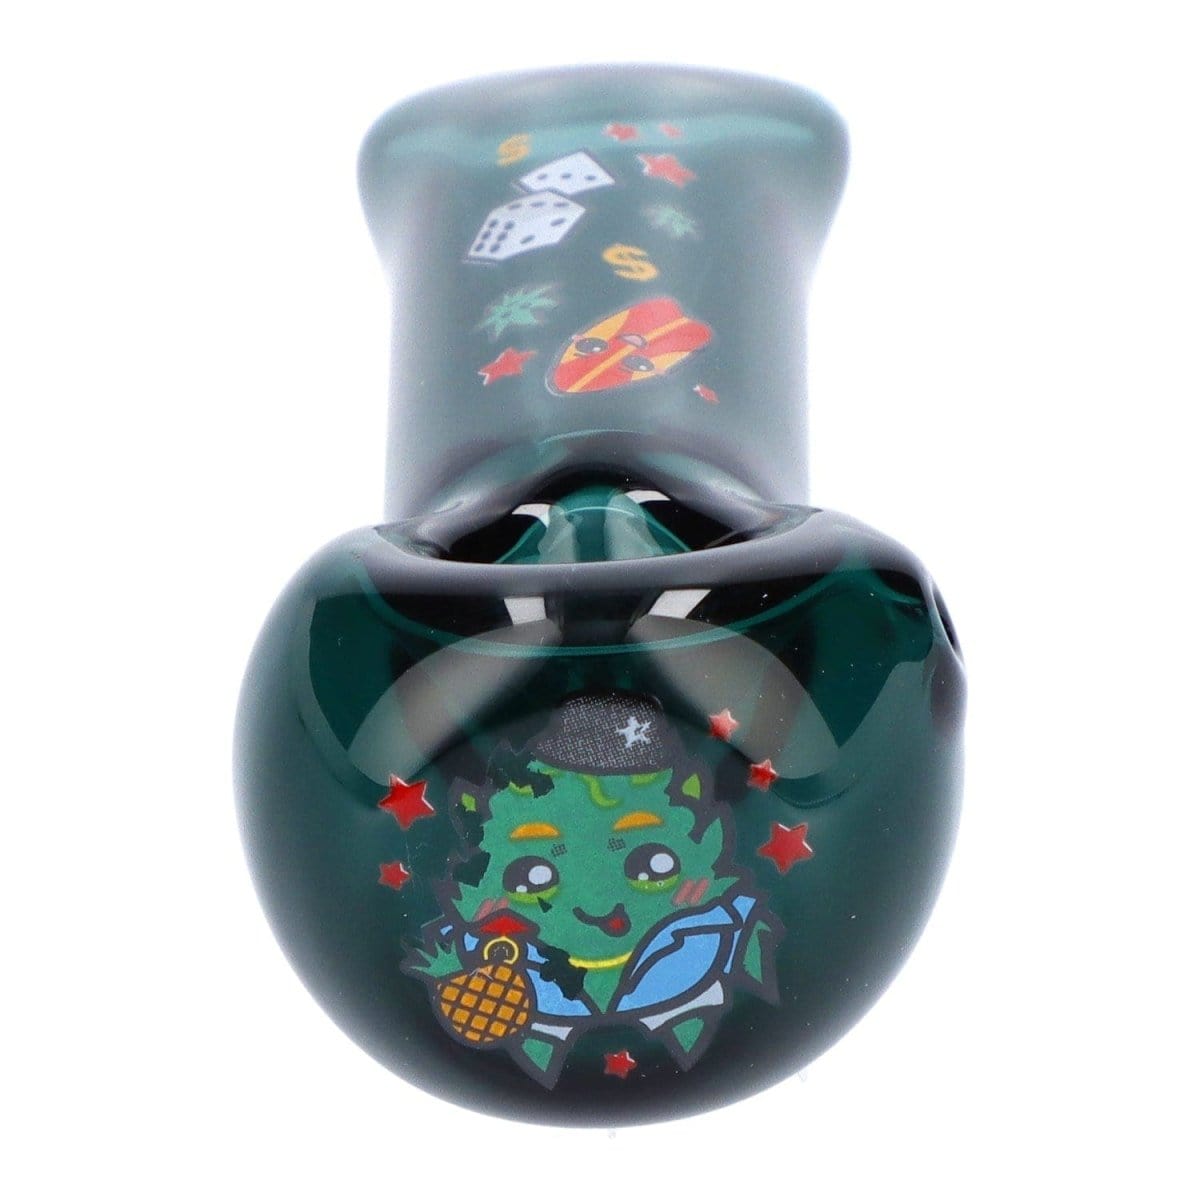 Wido Hand Pipe 4" Pineapple Express Hand Pipe - Transparent Teal